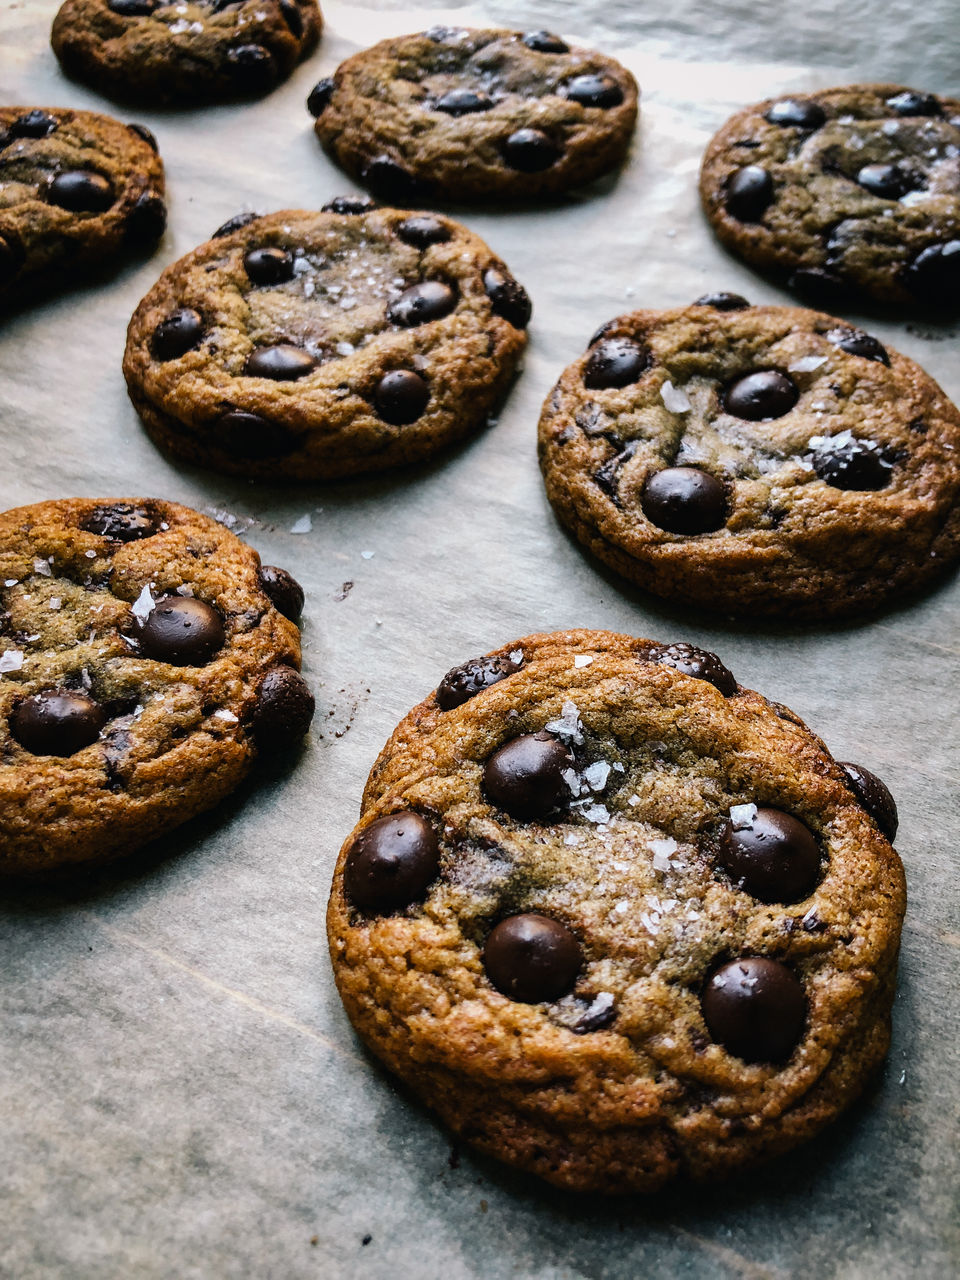 Fresh out-of-the-oven homemade chocolate chip cookies with fleur de sel on parchment paper